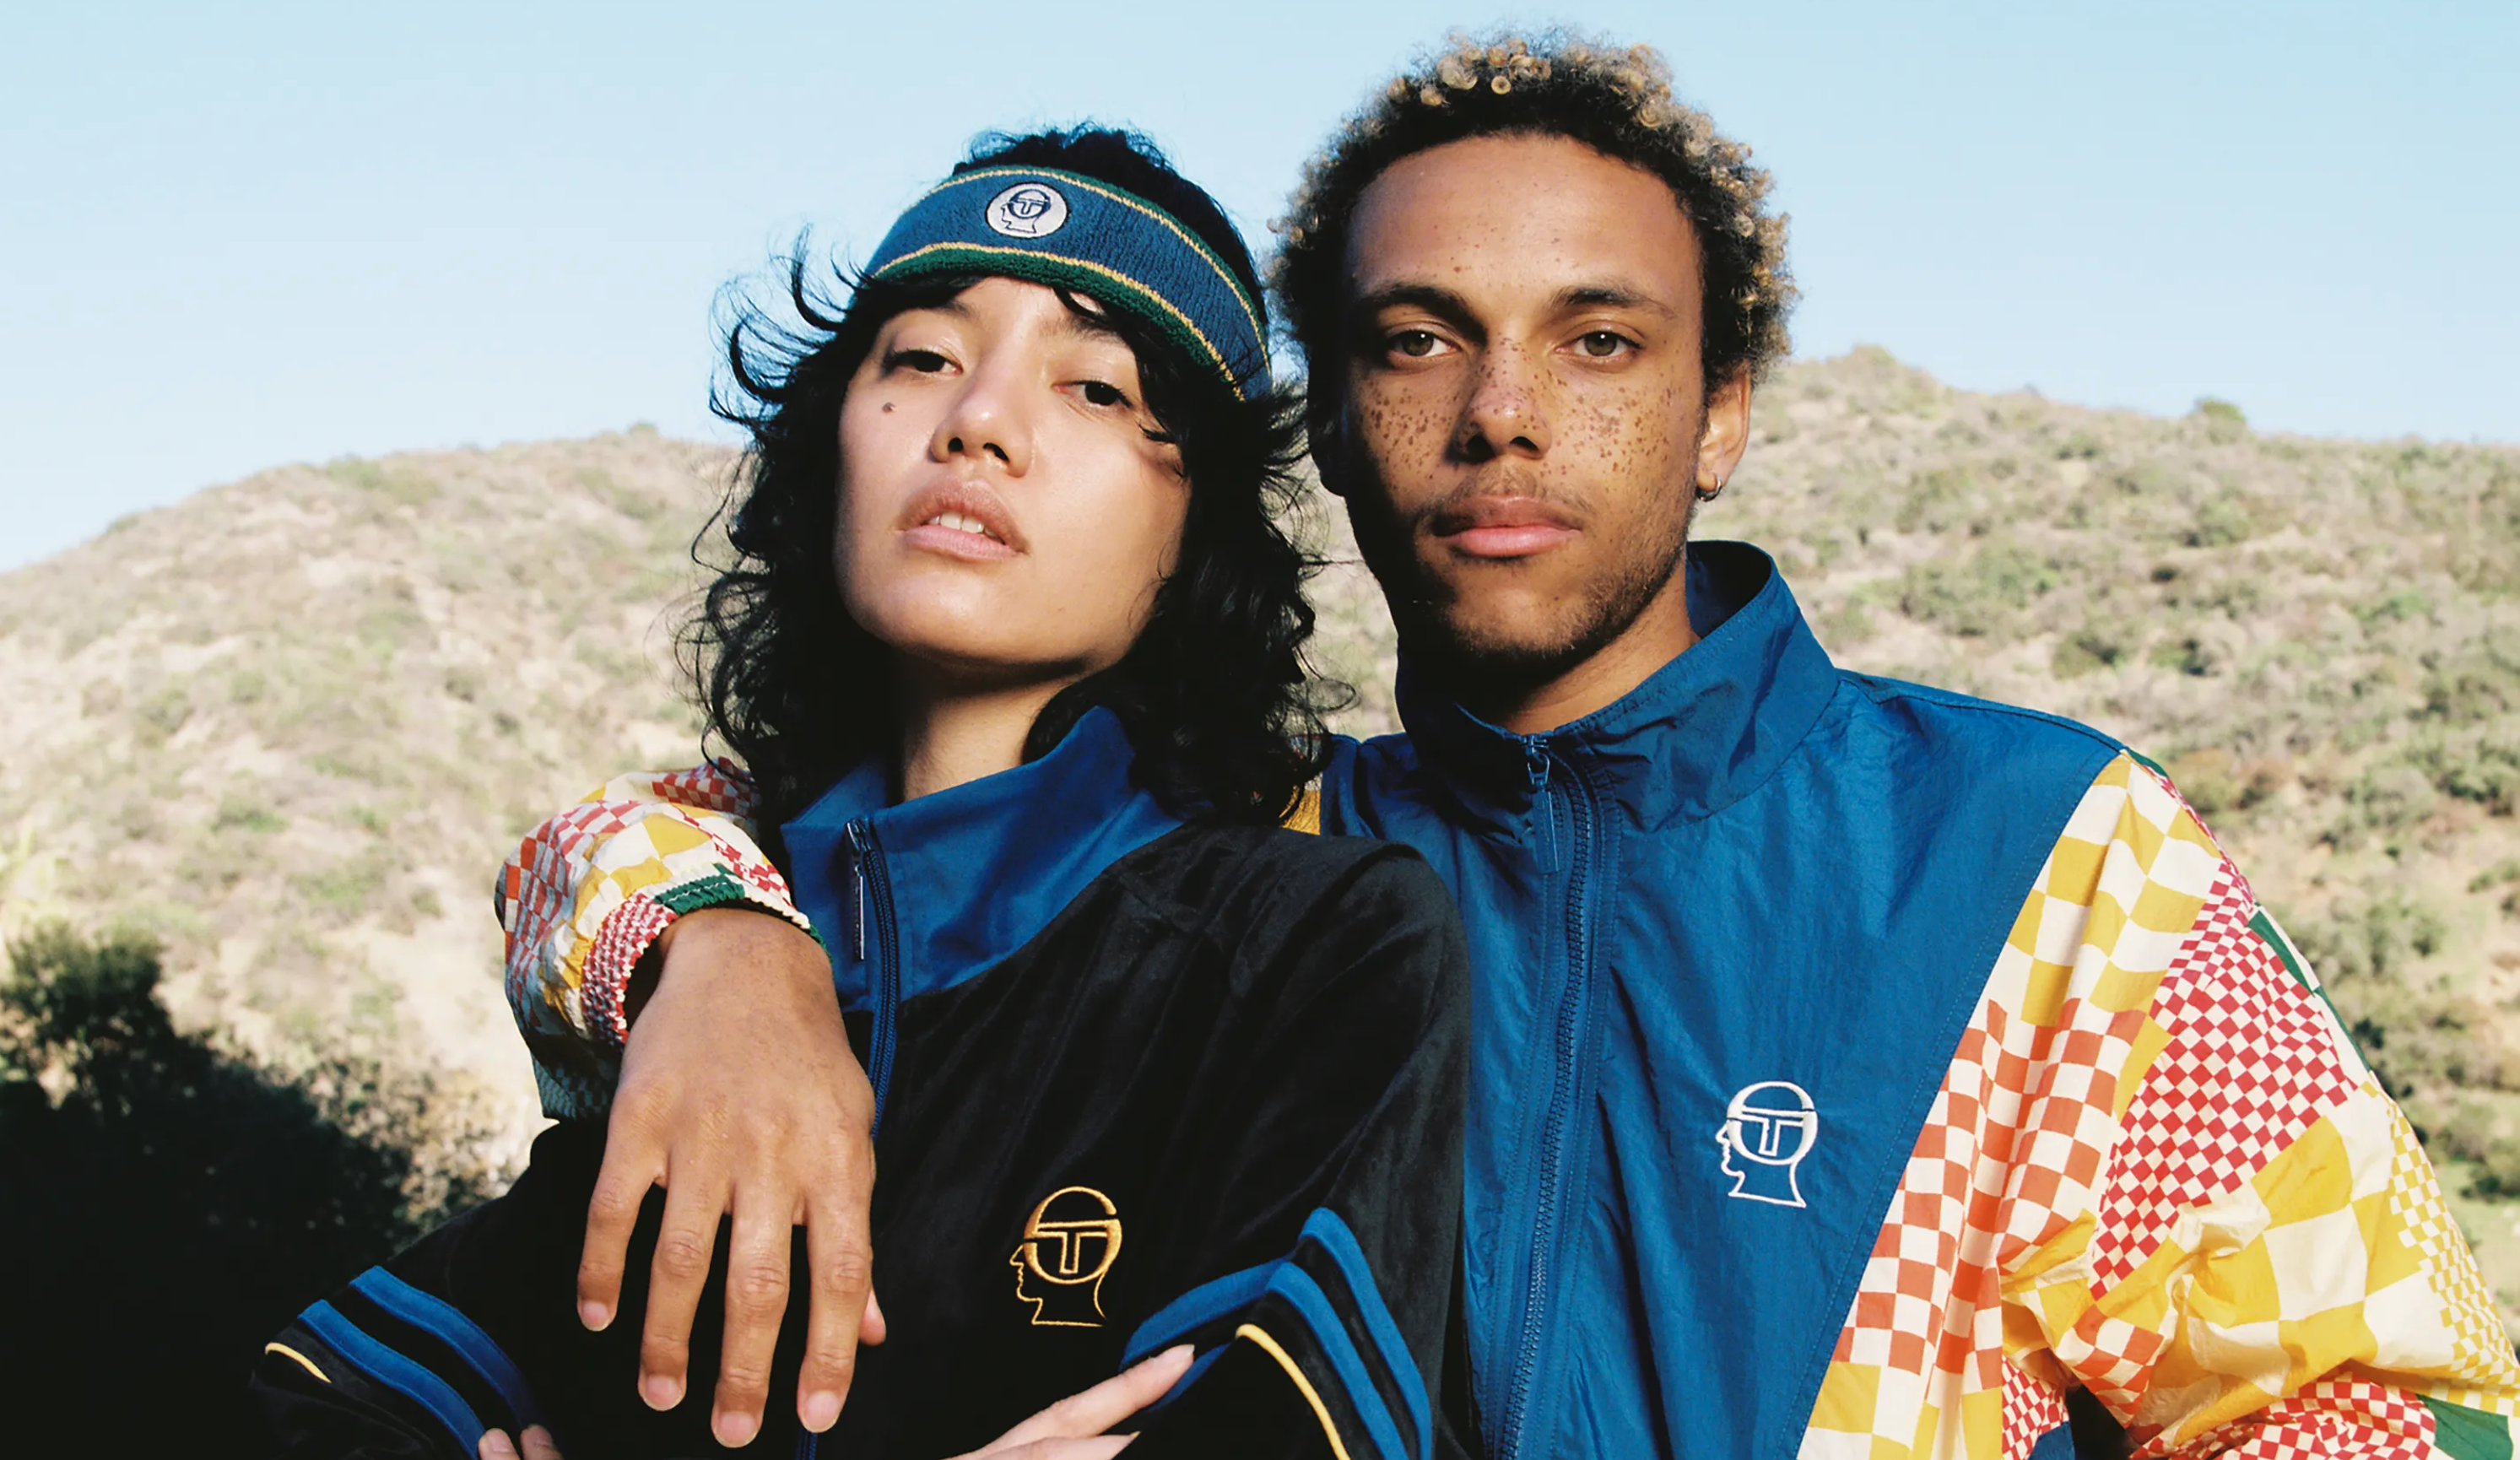 Sergio Tacchini and Rareview partner to redefine its digital and consumer experience